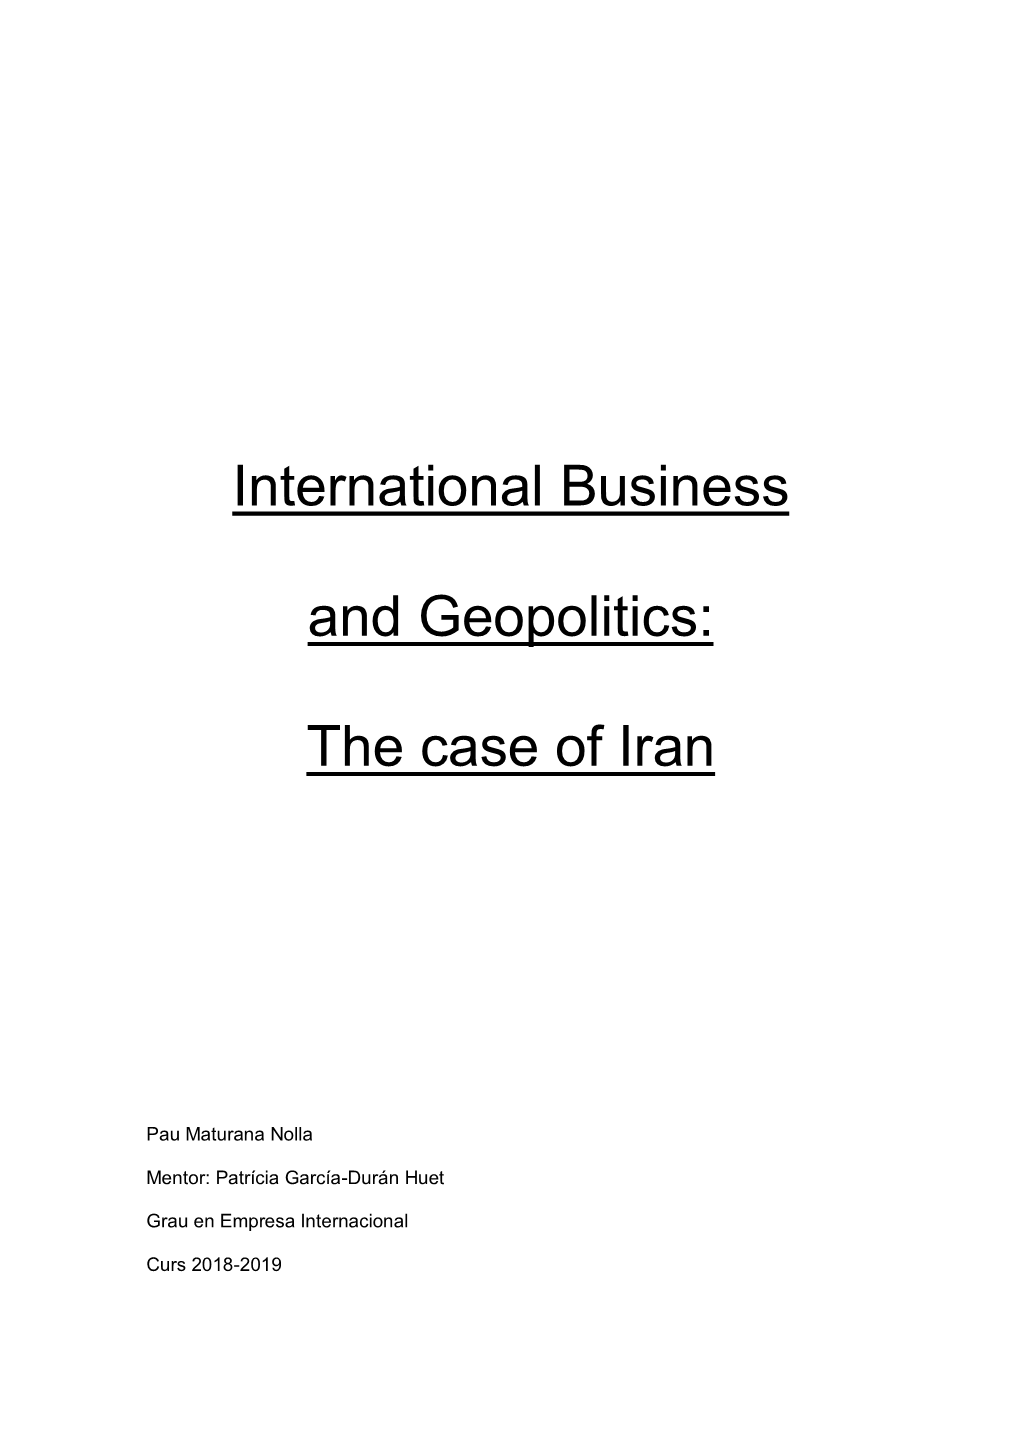 International Business and Geopolitics: the Case of Iran